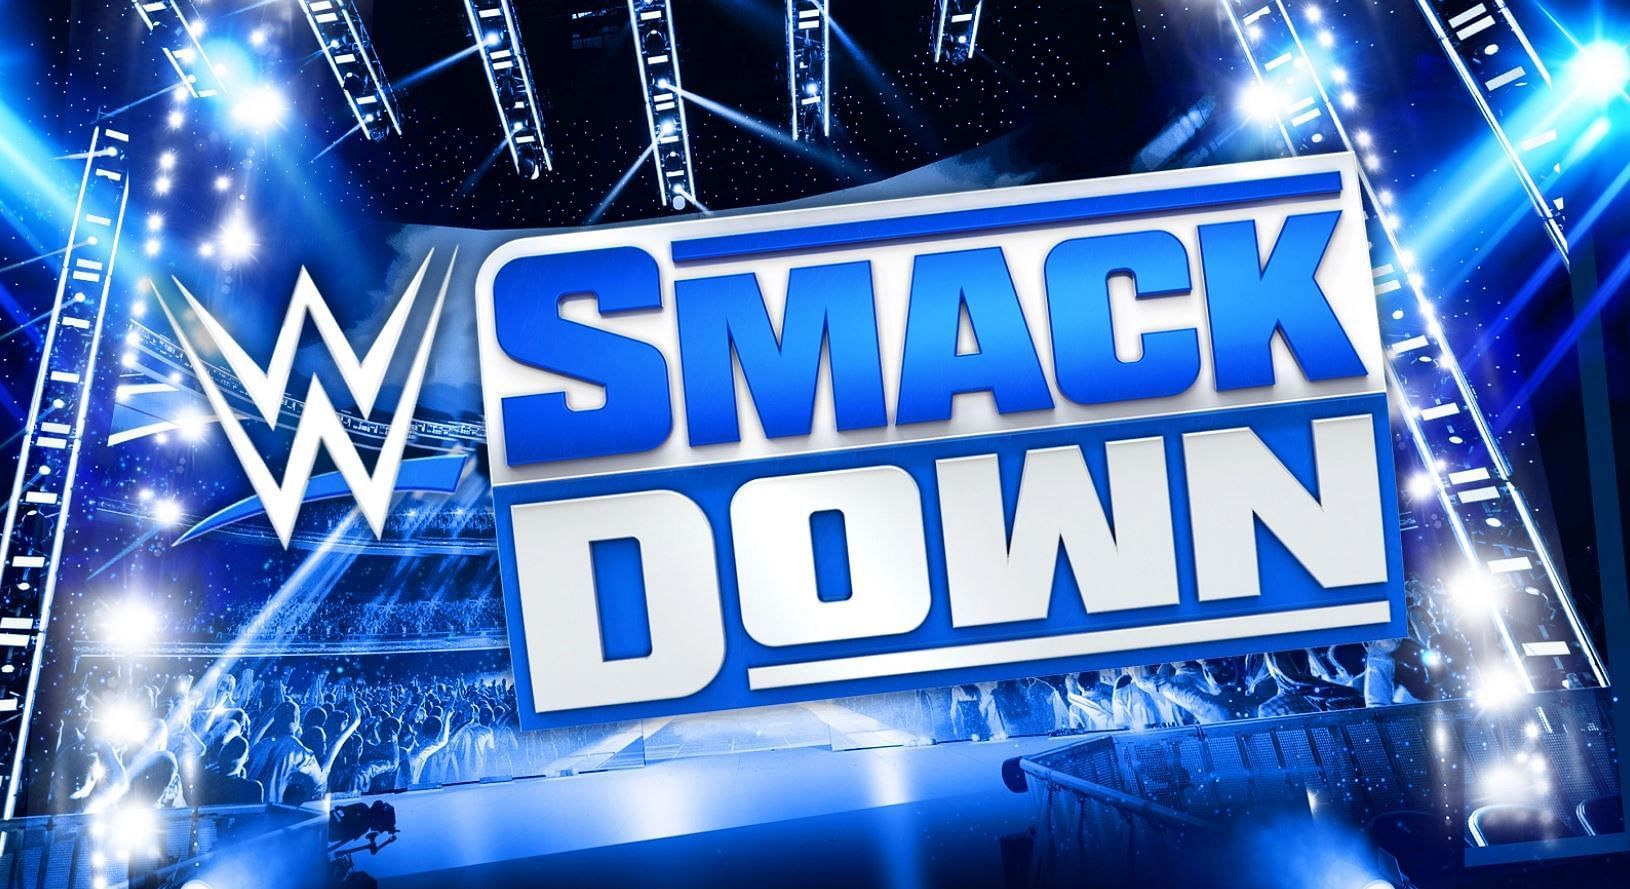 Top WWE SmackDown heel reveals interestimg details about real-life persona